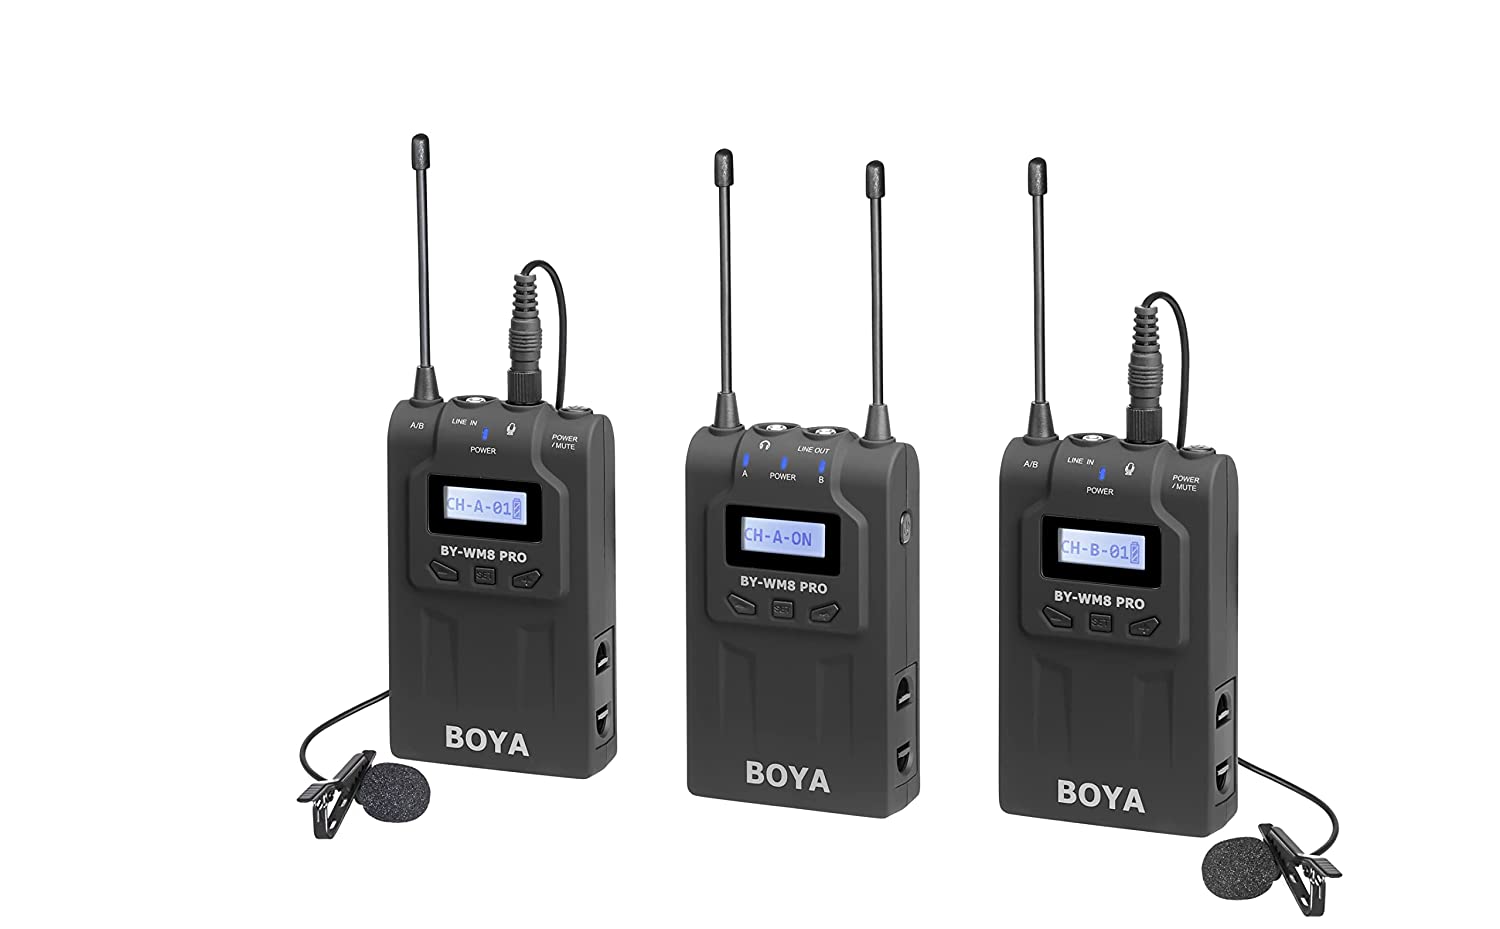 Boya by-WM8 Pro-K2 UHF Omnidirectional Dual-Channel Wireless Microphone System with One Receiver and Two Transmitter (Gray)